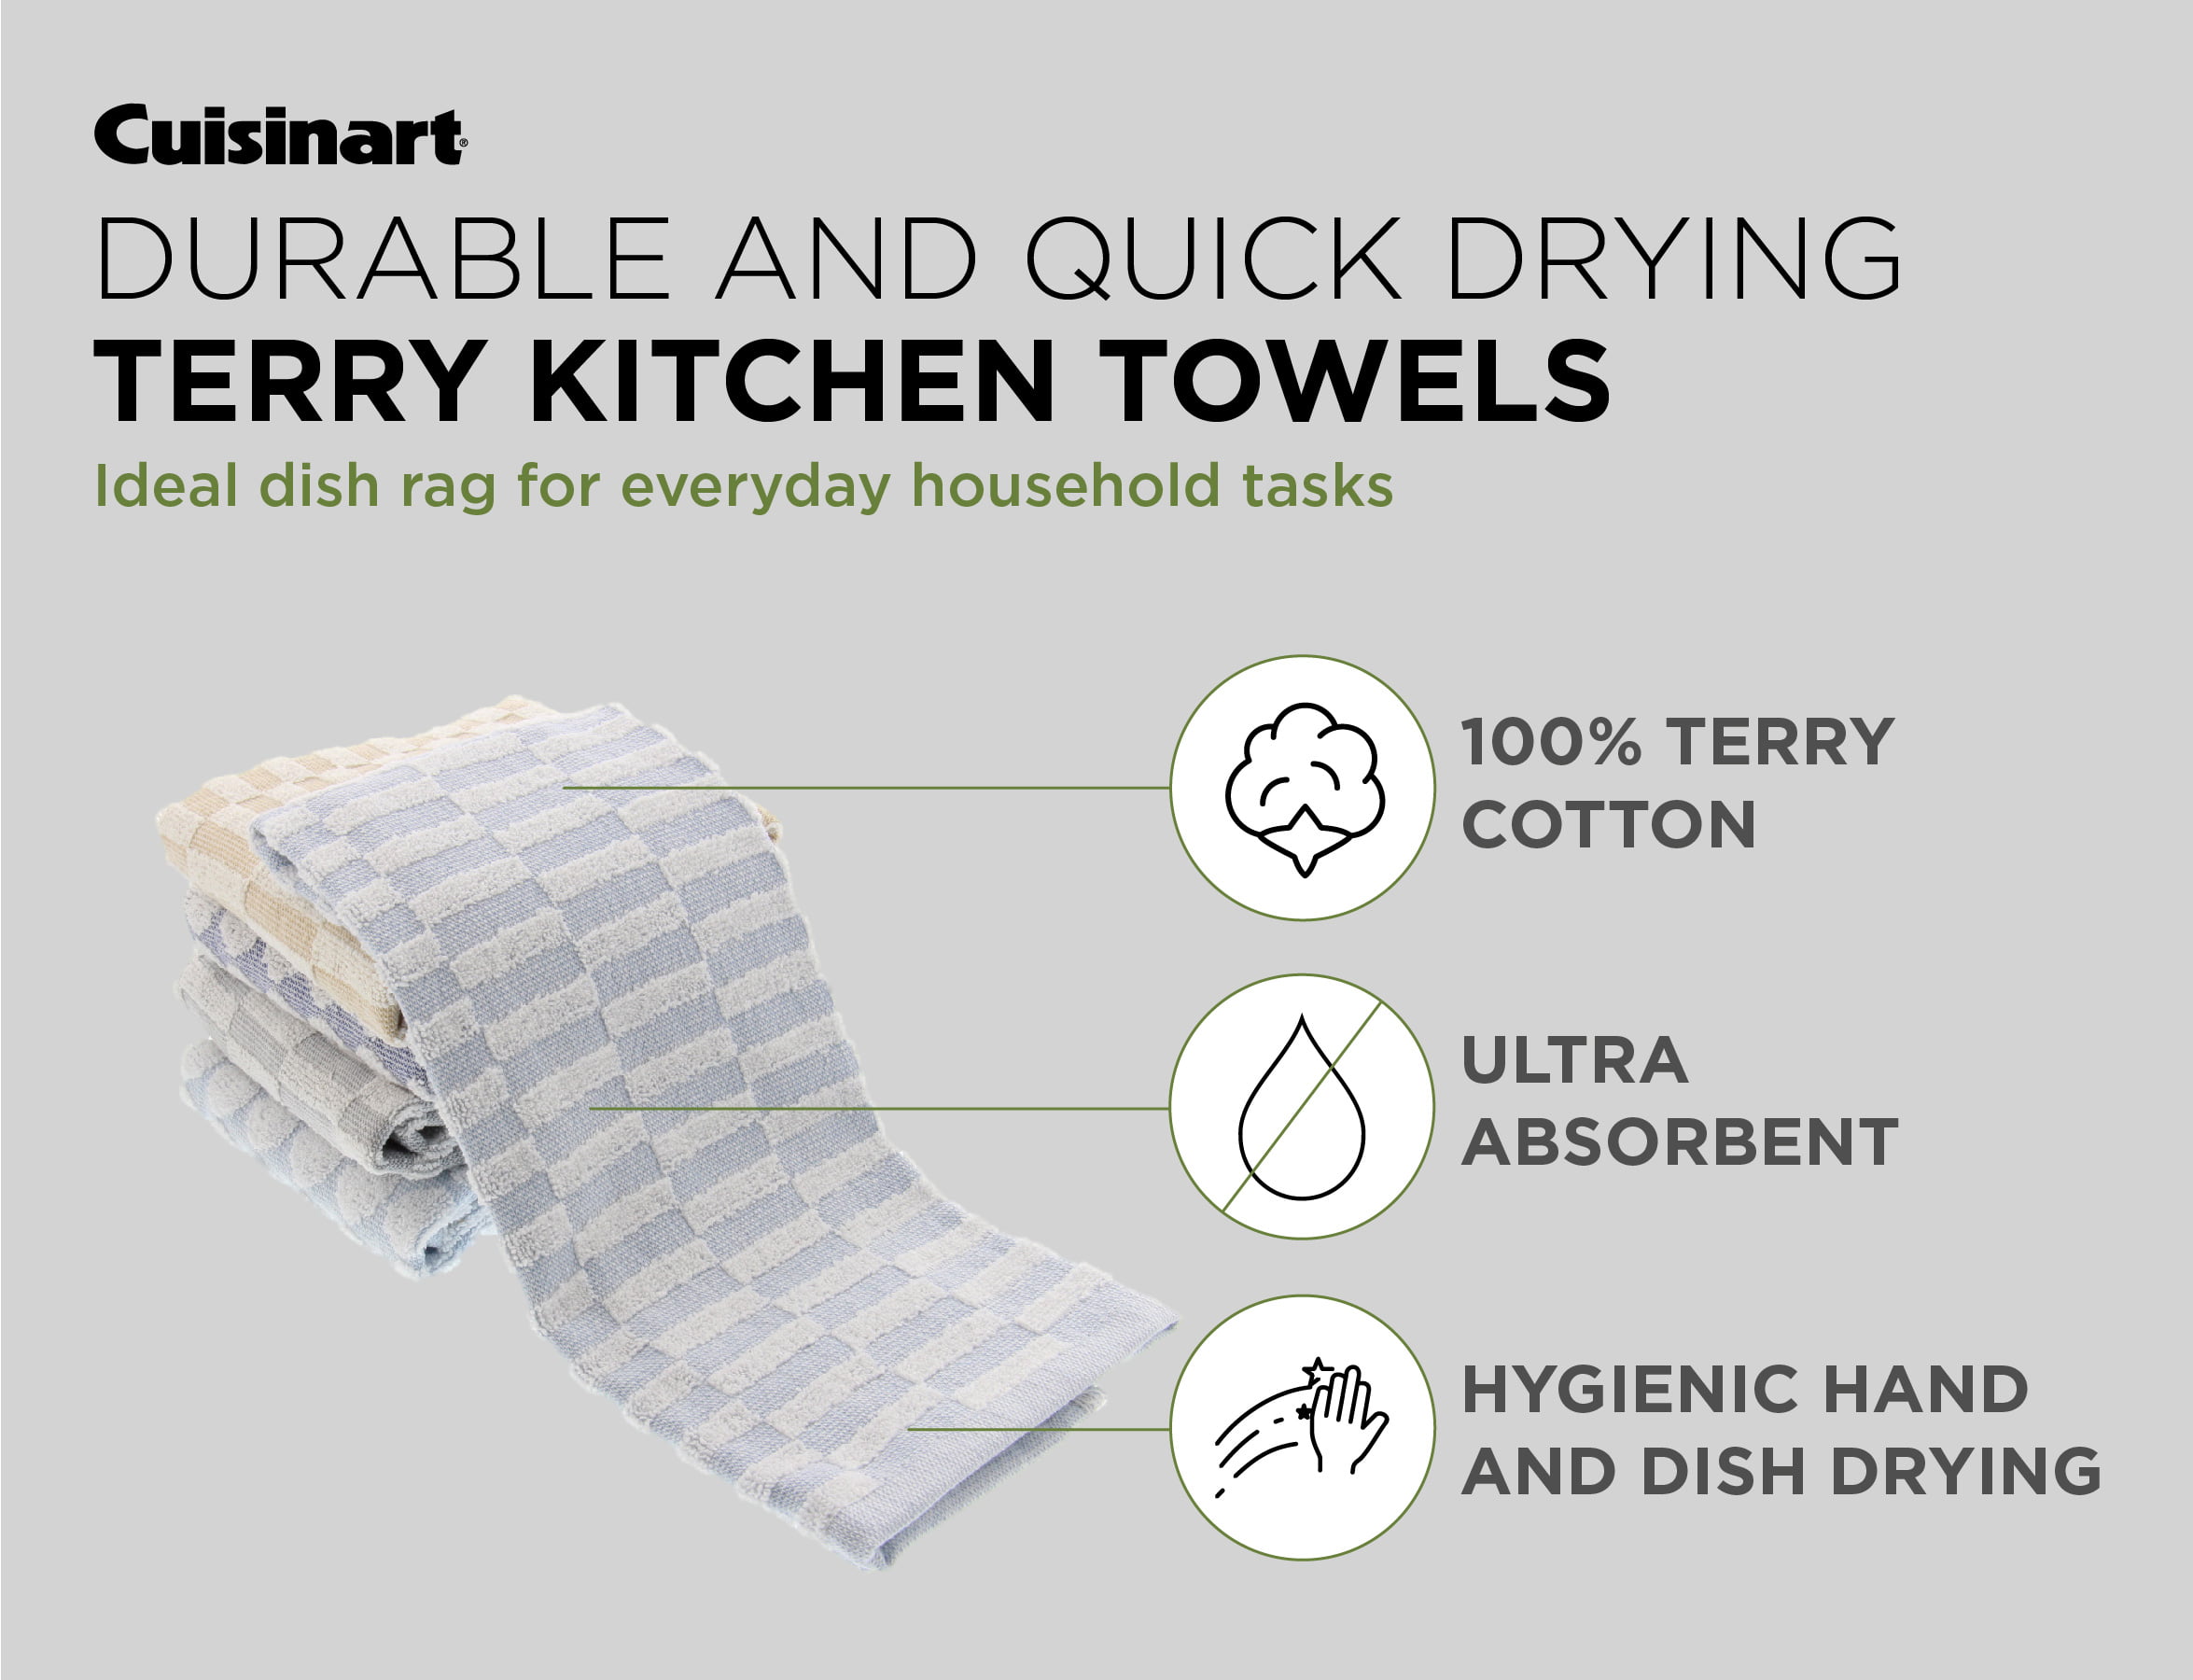 Cuisinart - Winter Wishes Gray Plaid Fouta Kitchen Towels, 2-Pack